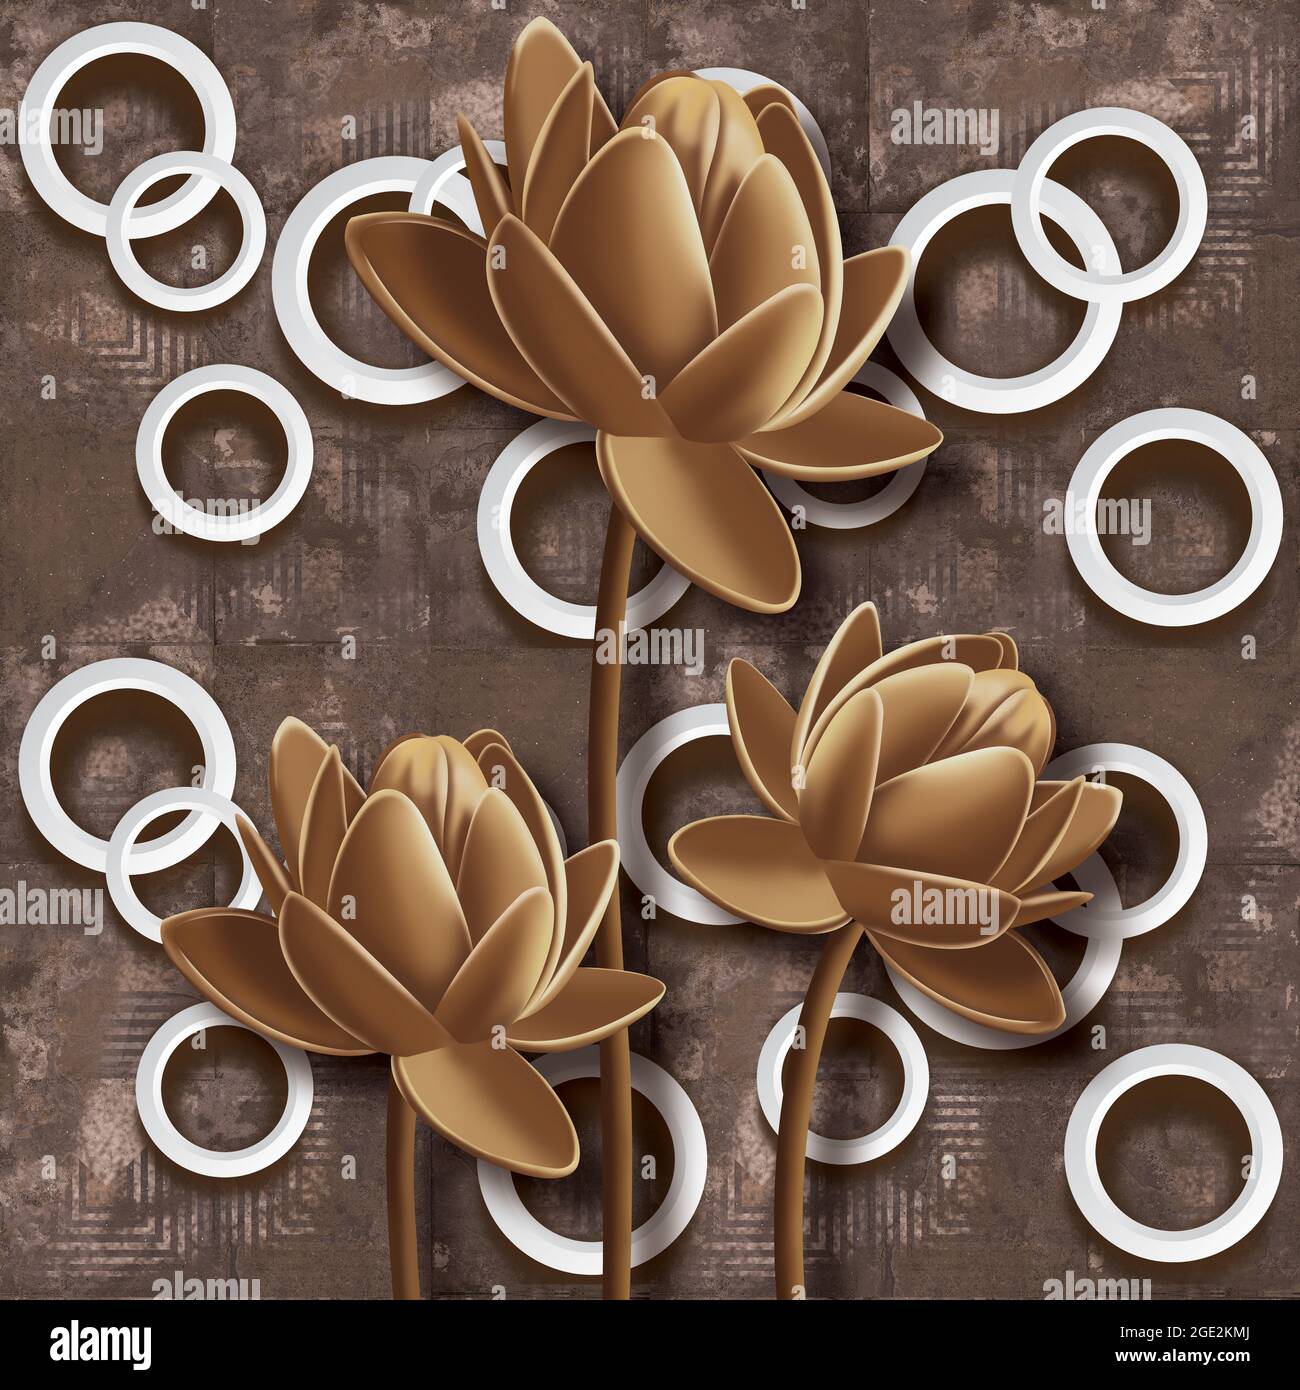 3D wallpaper background High quality rendering decorative mural